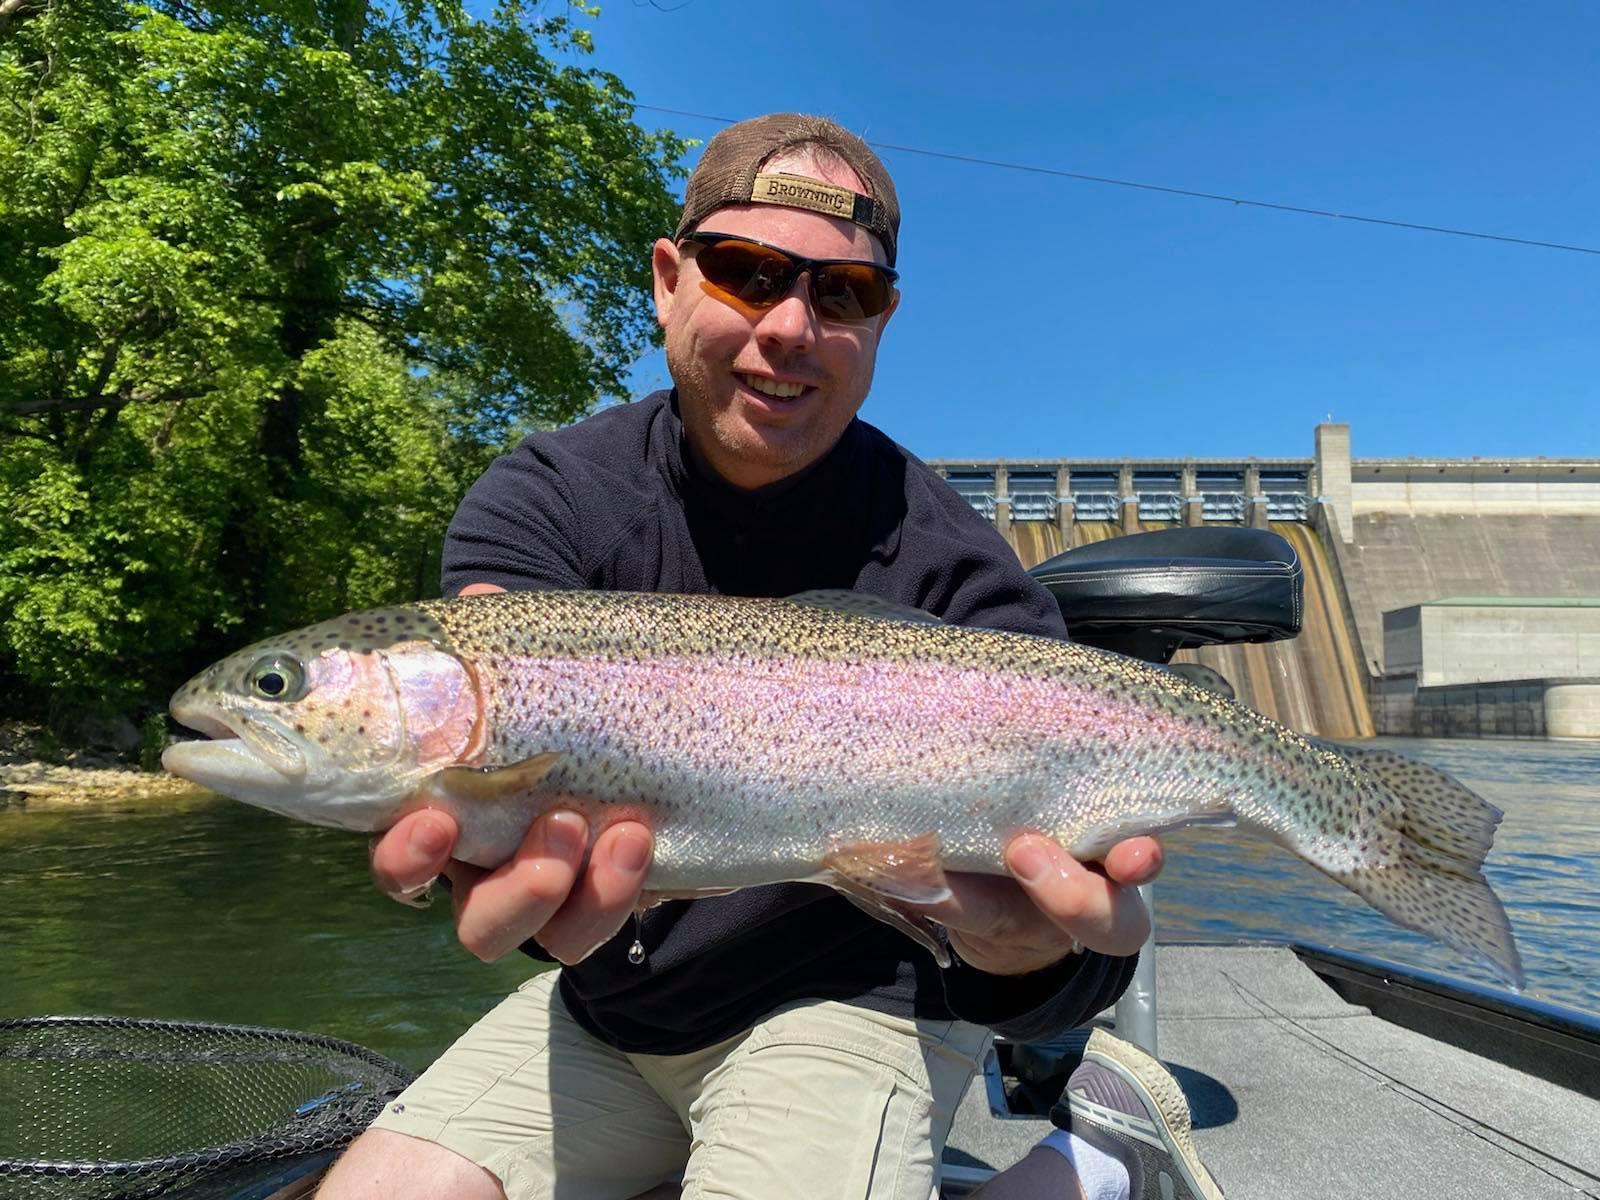 Lilley's Lake Taneycomo Fishing Report, June 1 - Taneycomo fishing reports  - OzarkAnglers.Com Forum